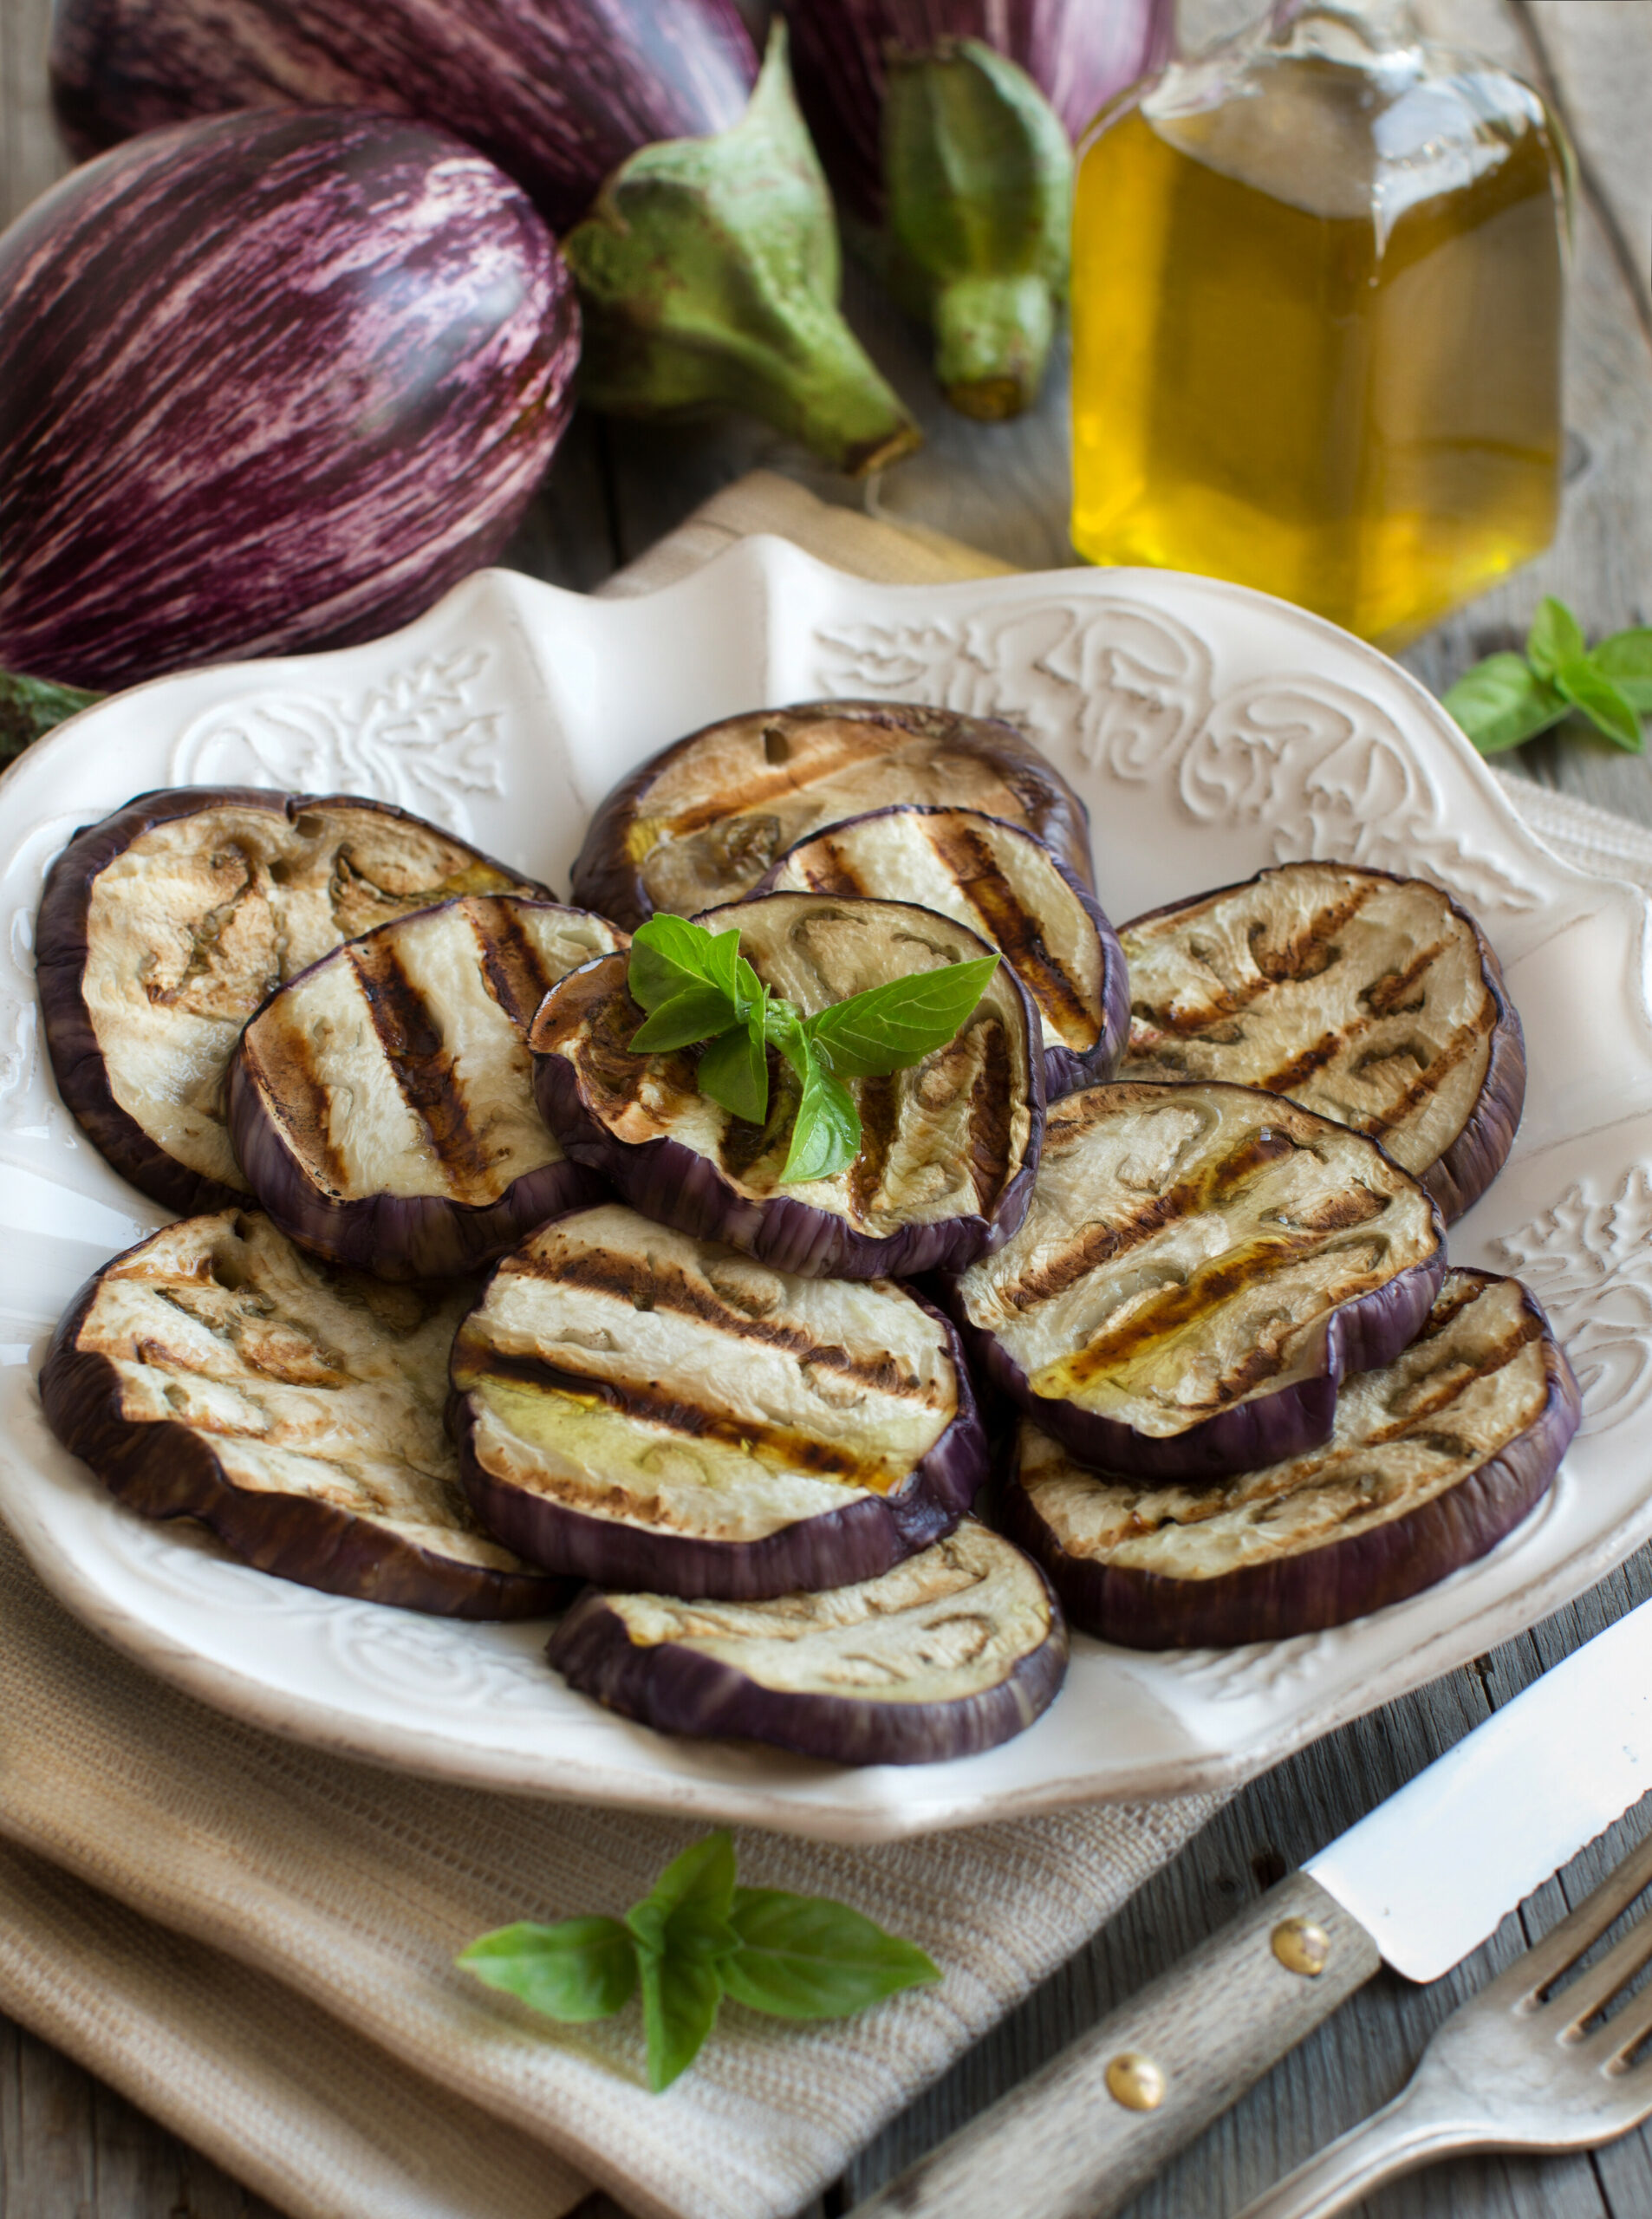 How To Grill Eggplant The Right Way